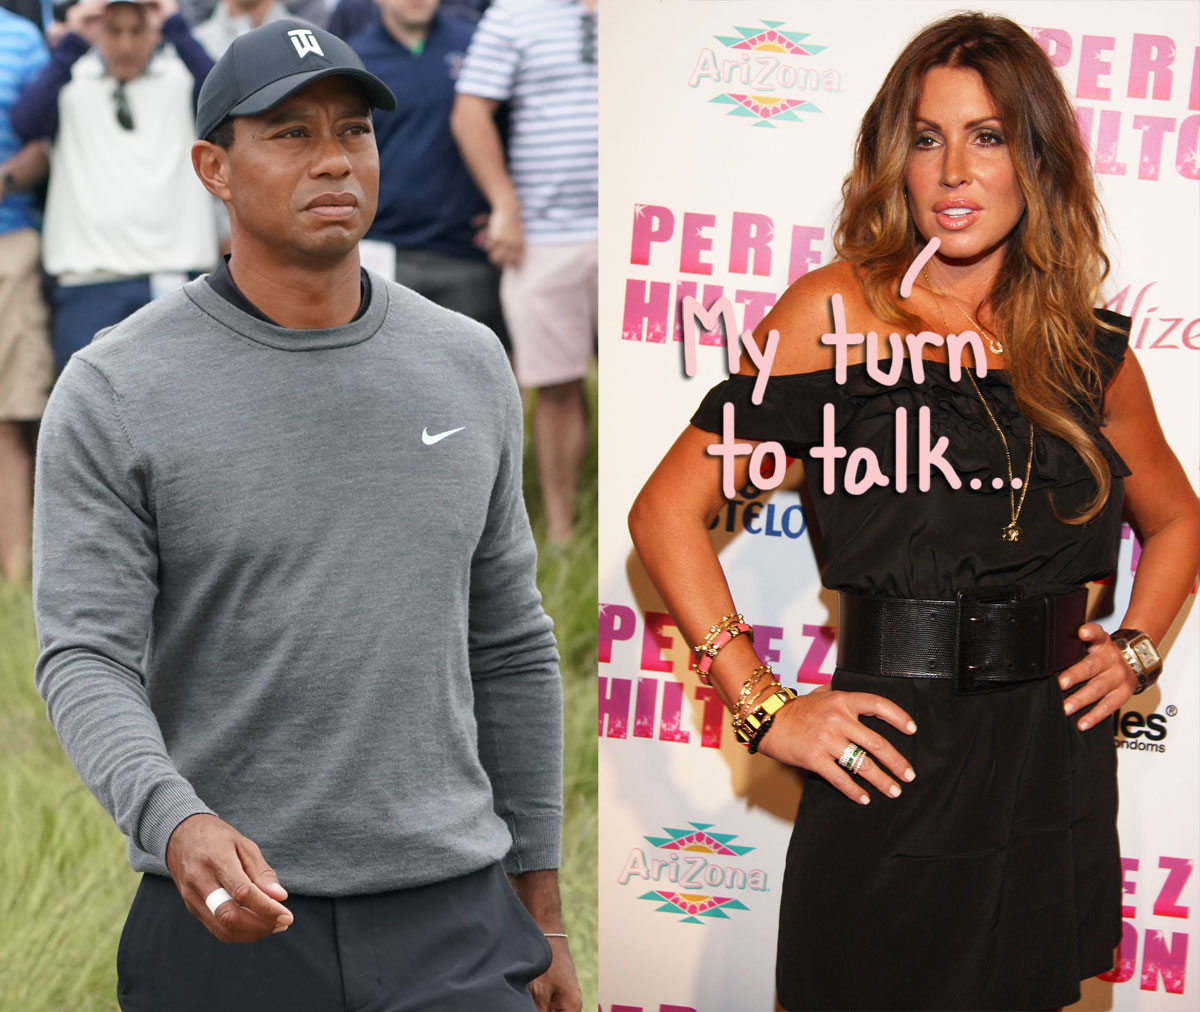 Tiger Woods Mistress Reveals His Last Text To Her In Upcoming Tell-All Documentary, And HOO BOY! photo